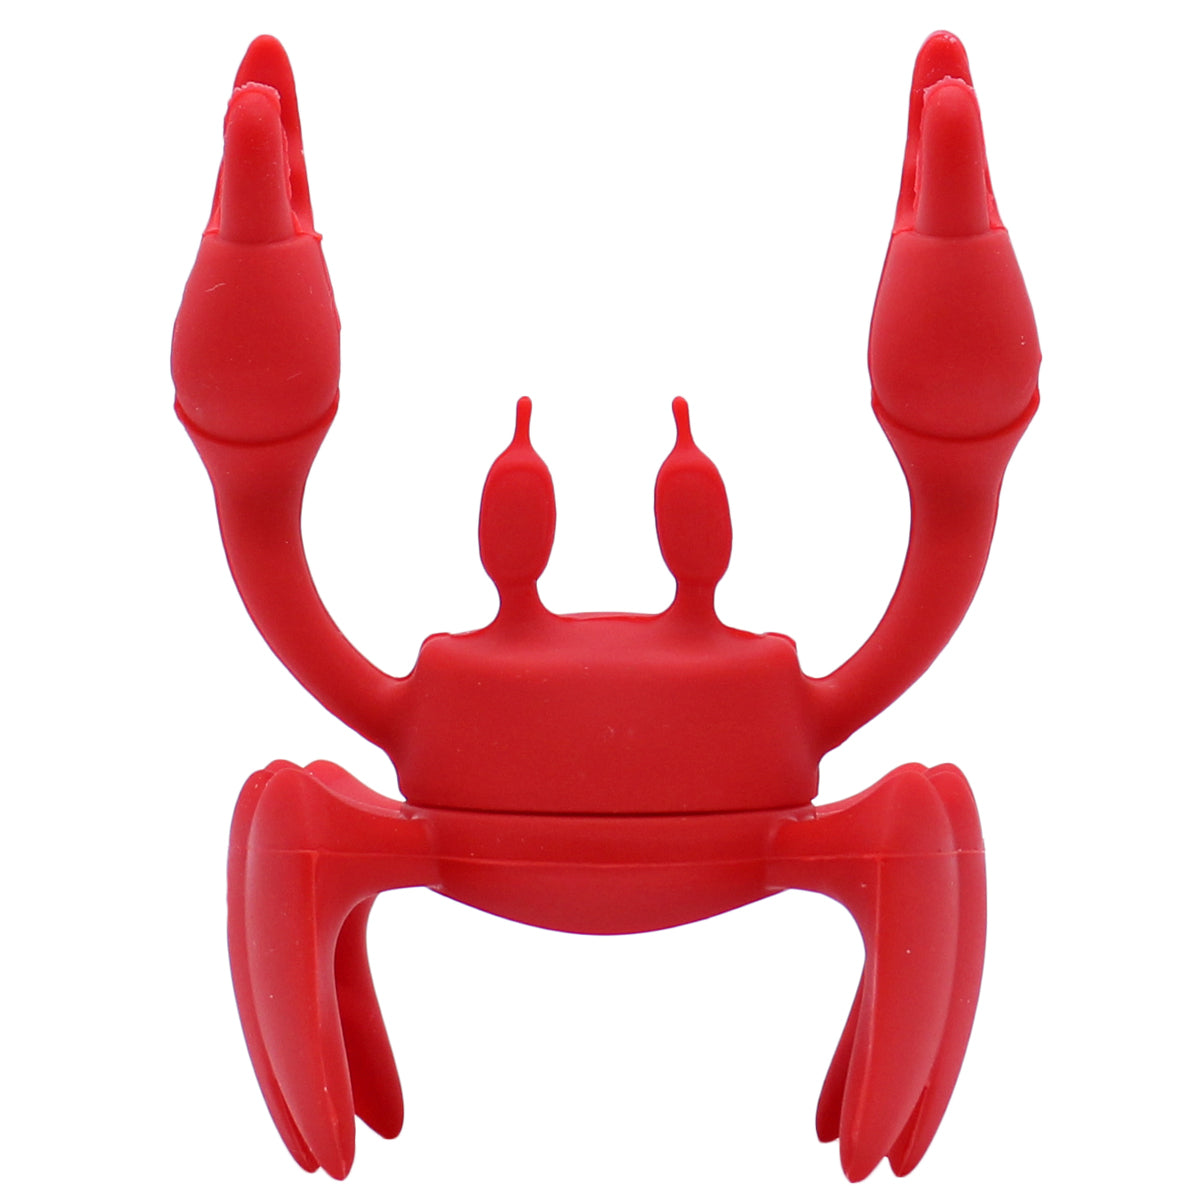 Ceramic Crab Teabag Holder Small Spoon Rest Table Accent in Coral Red or  Marine Blue